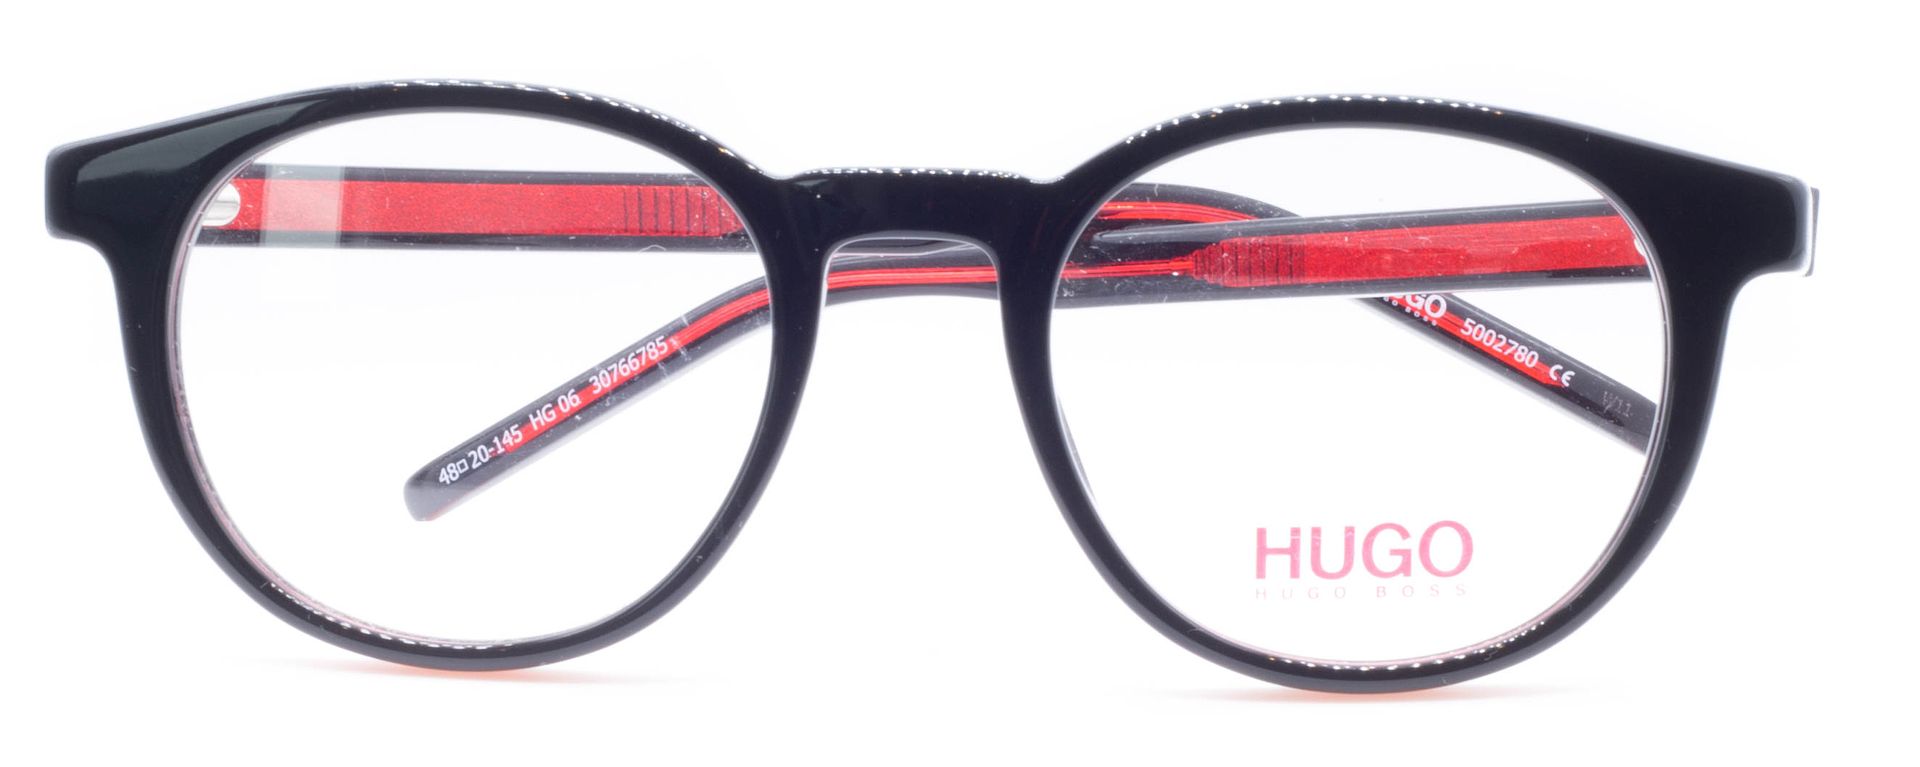 Hugo Boss Hg06 Cheaper Than Retail Price Buy Clothing Accessories And Lifestyle Products For Women Men